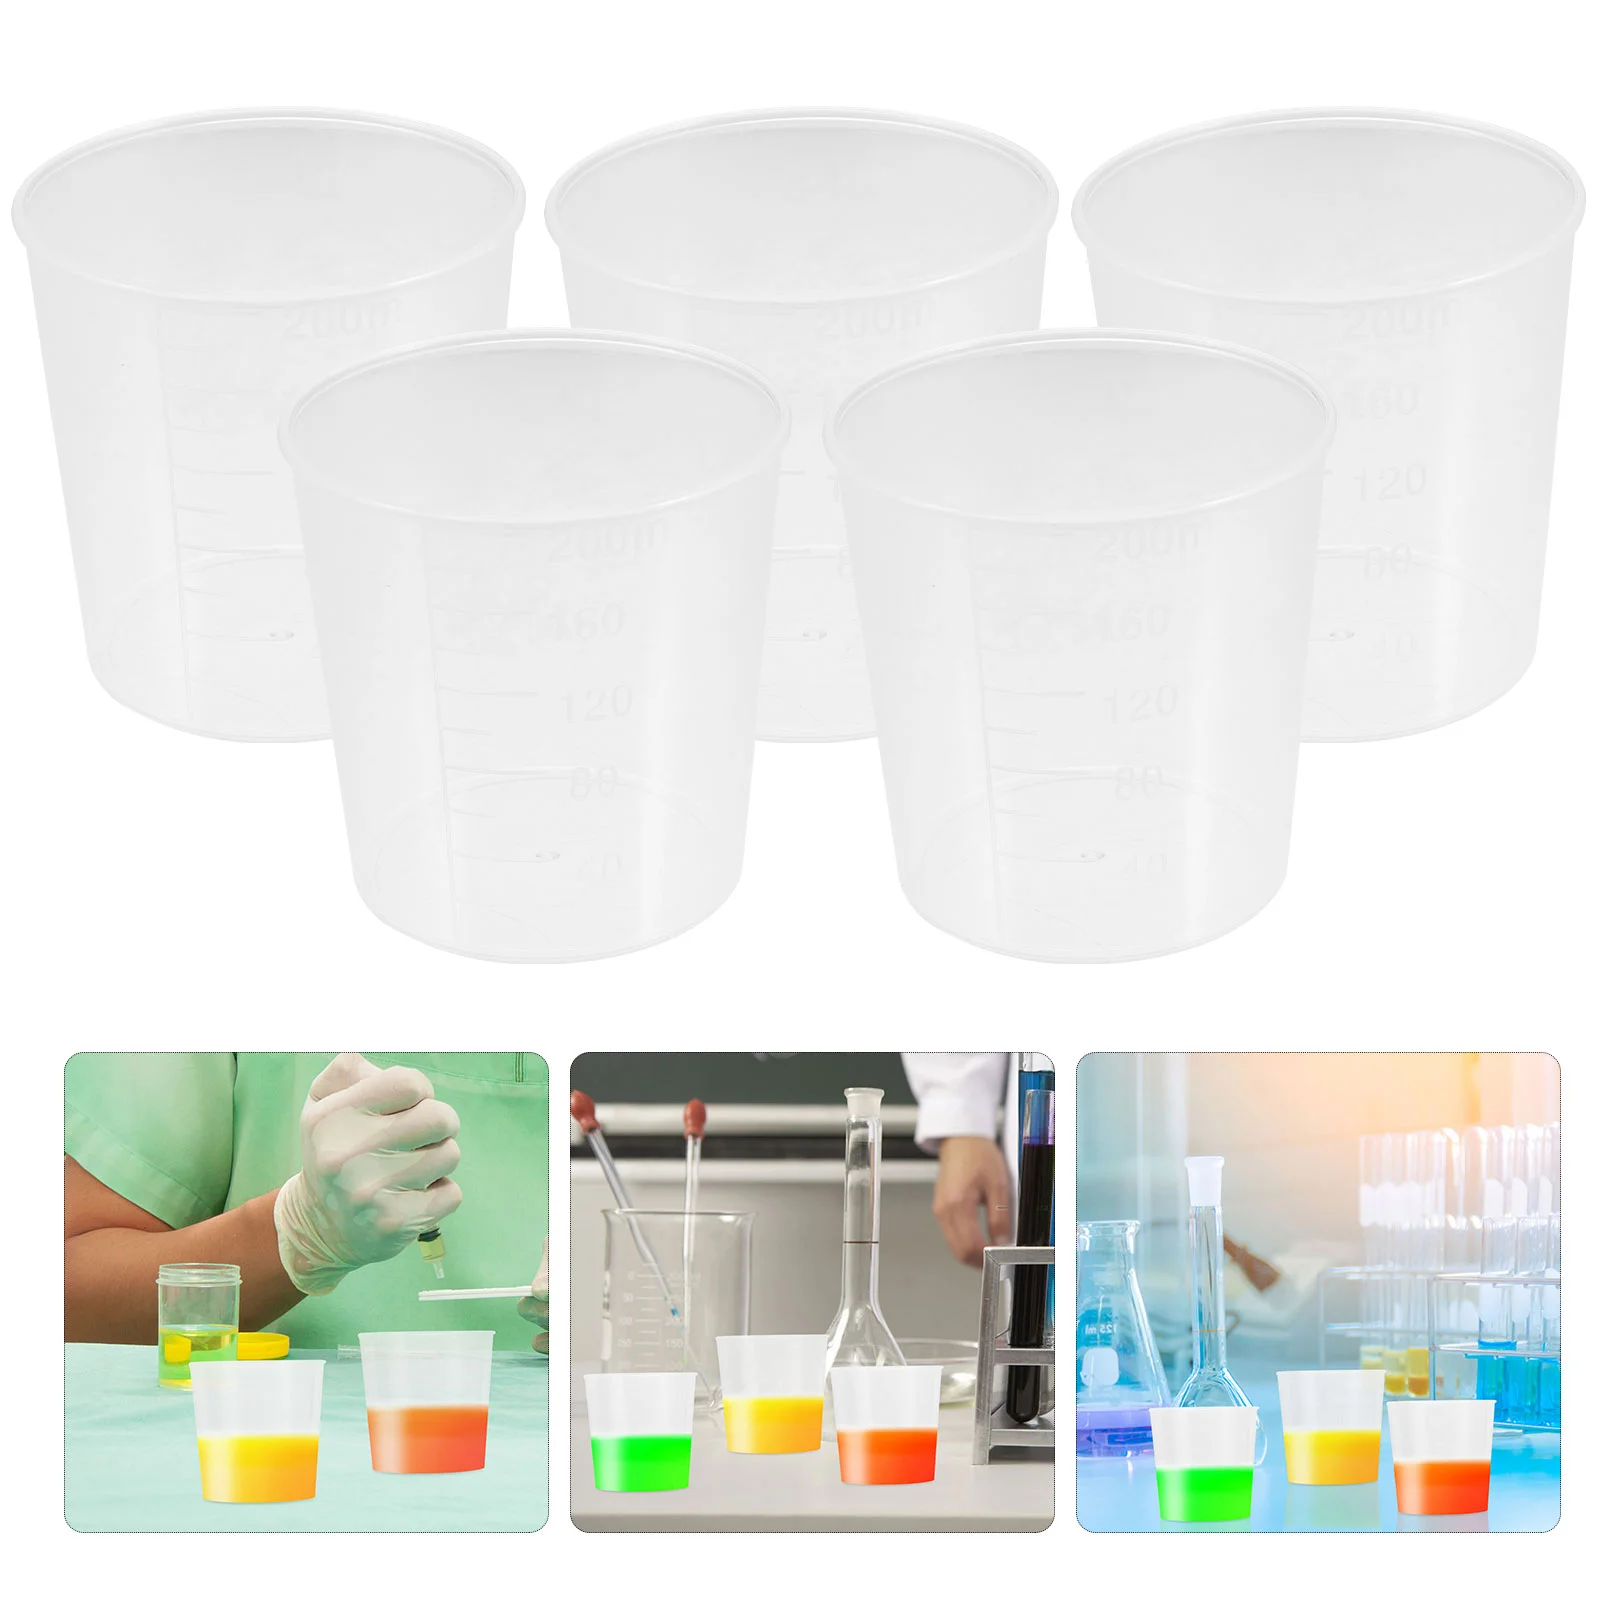 

20 Pcs Measuring Cup Graduated Clear Mixing Cups Measure Kitchen Lid Test Scale Liquid Sample Container